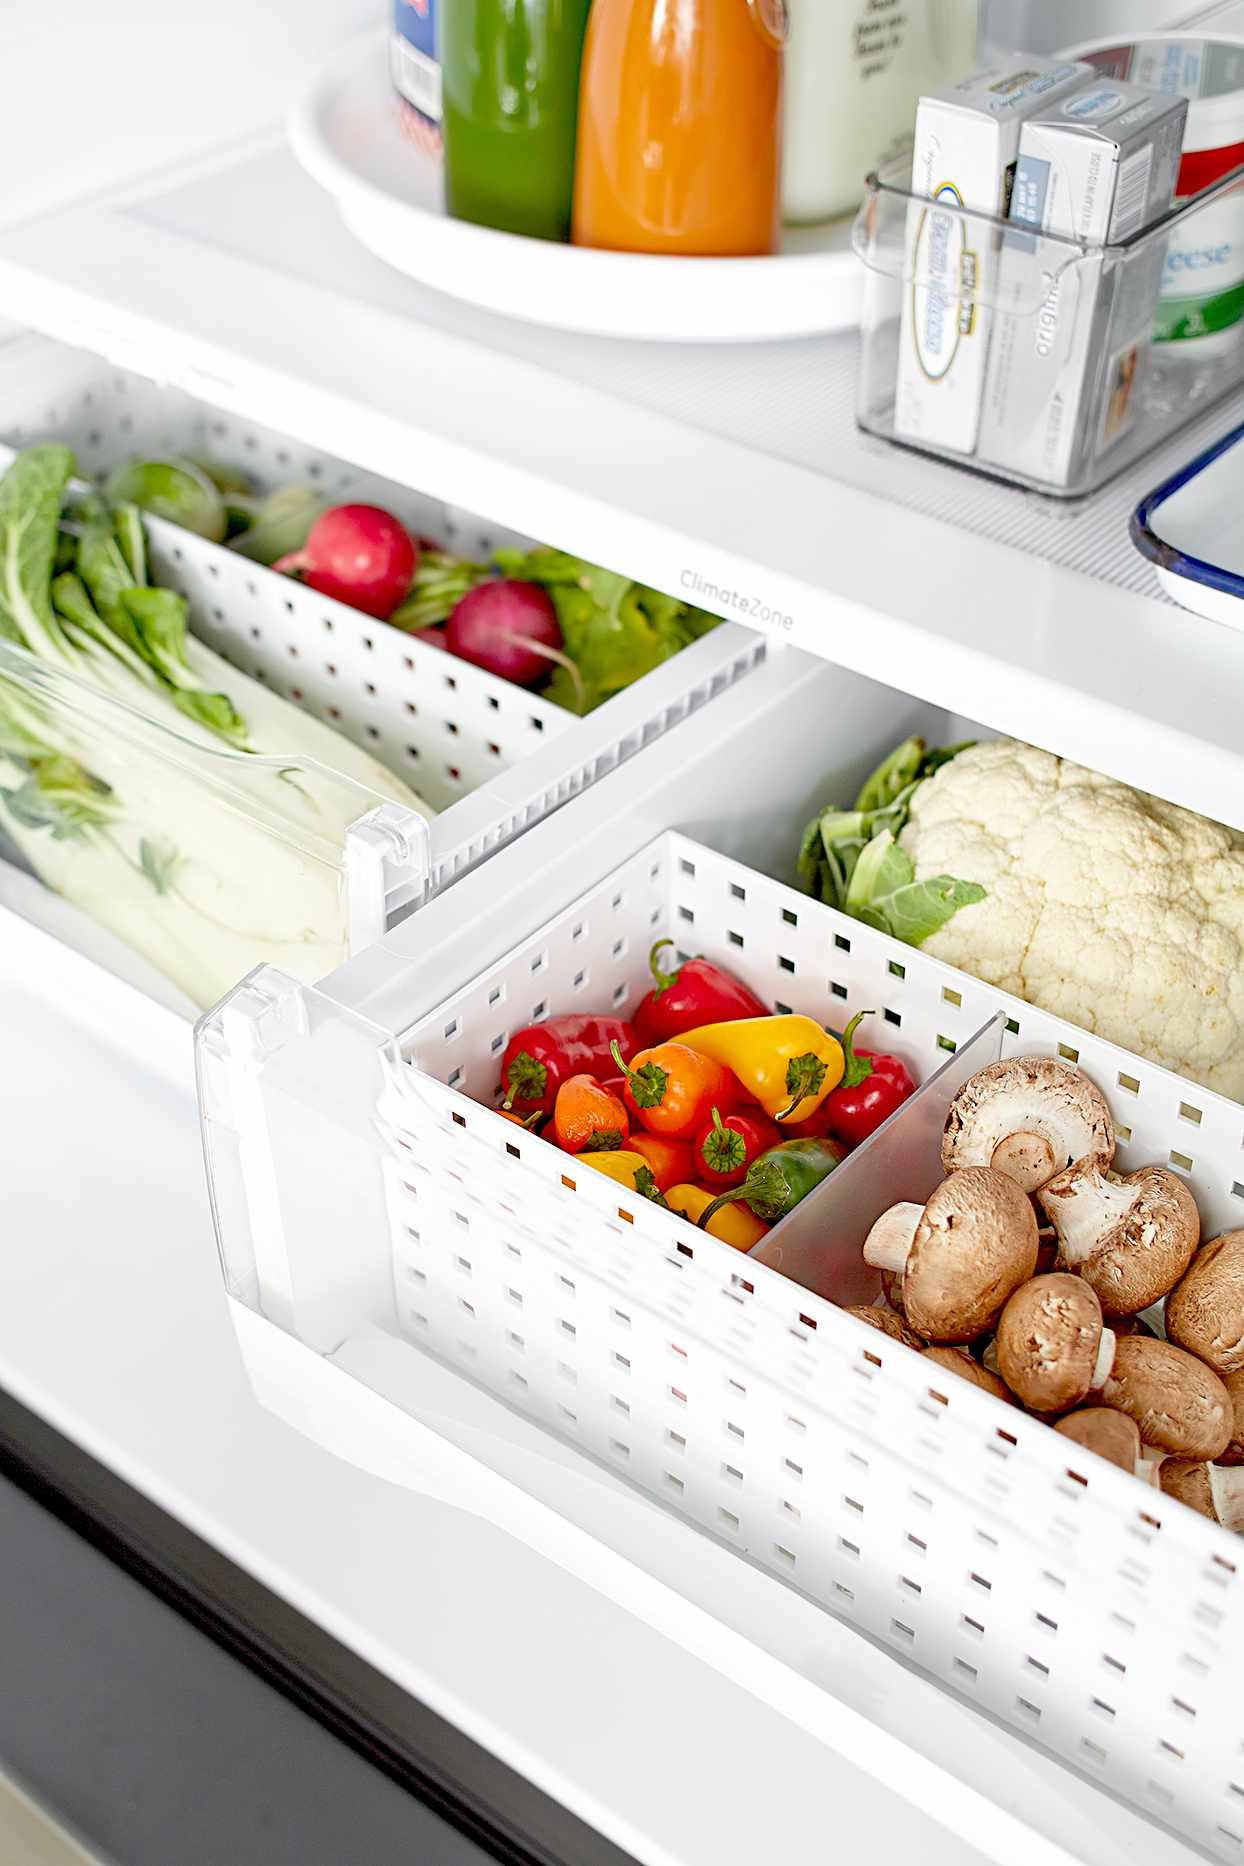 How to clean a mini refrigerator Shelves and Drawers